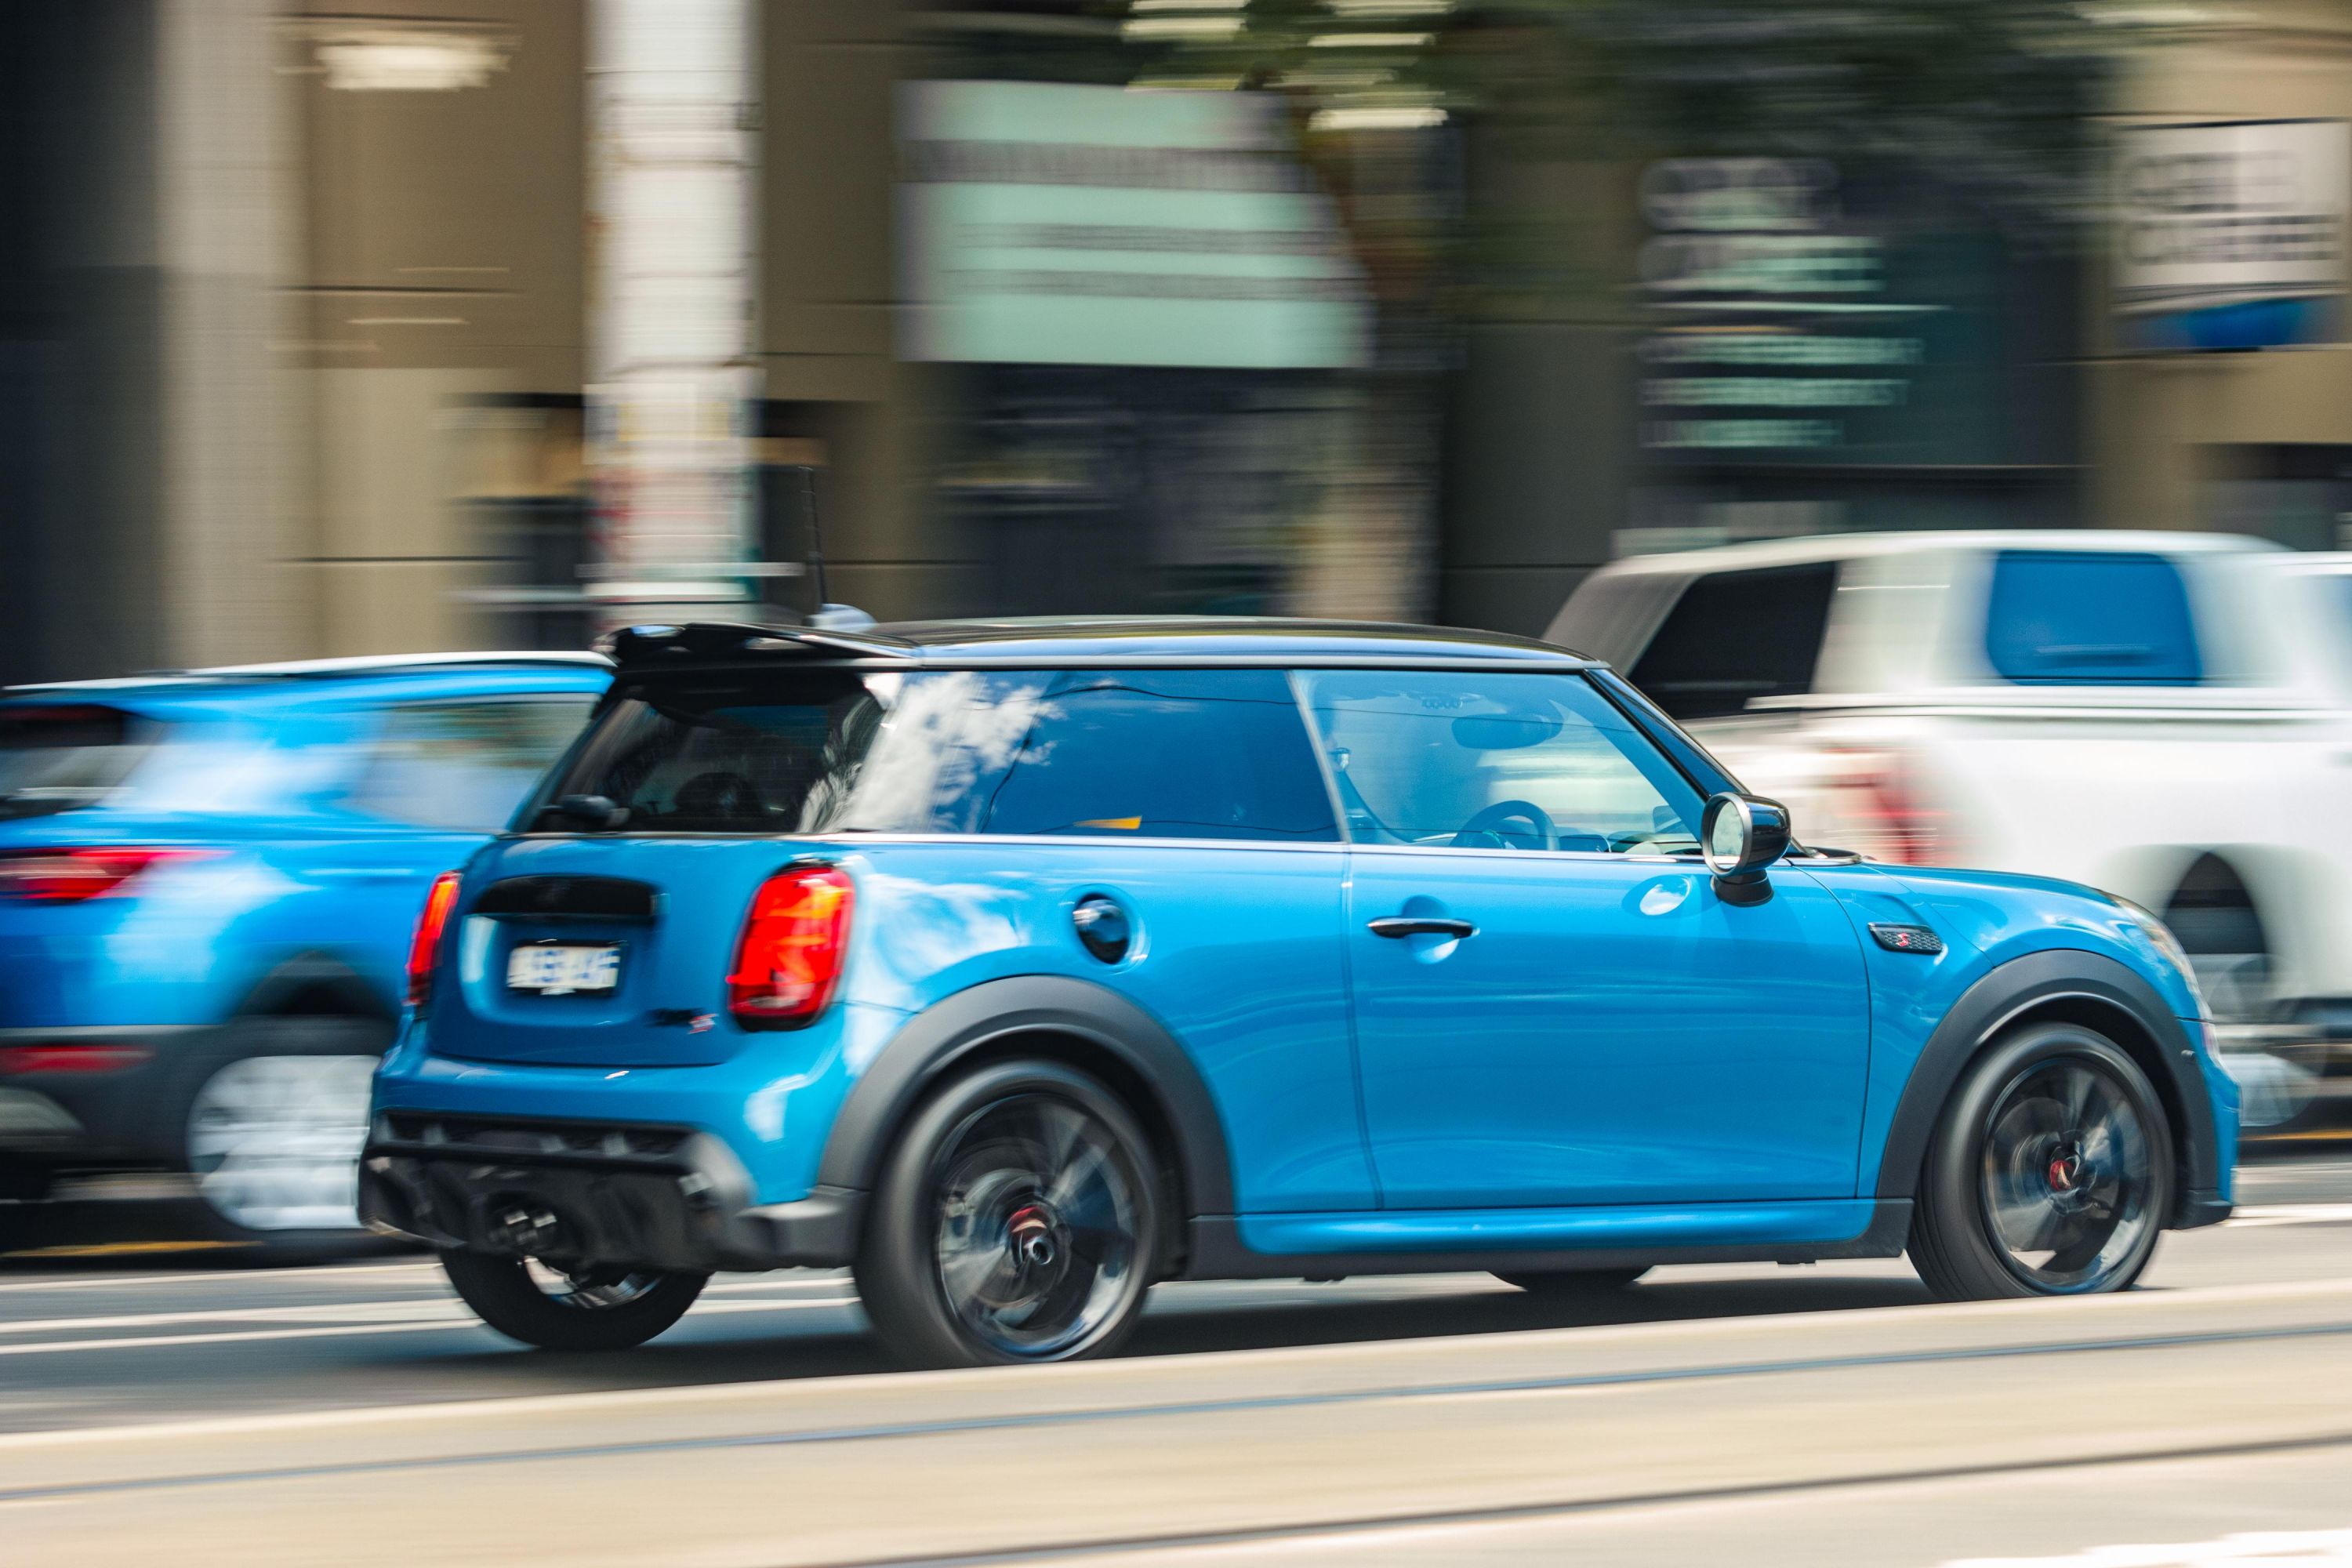 Review: The 2022 MINI Cooper S is more of a high-performance hatchback